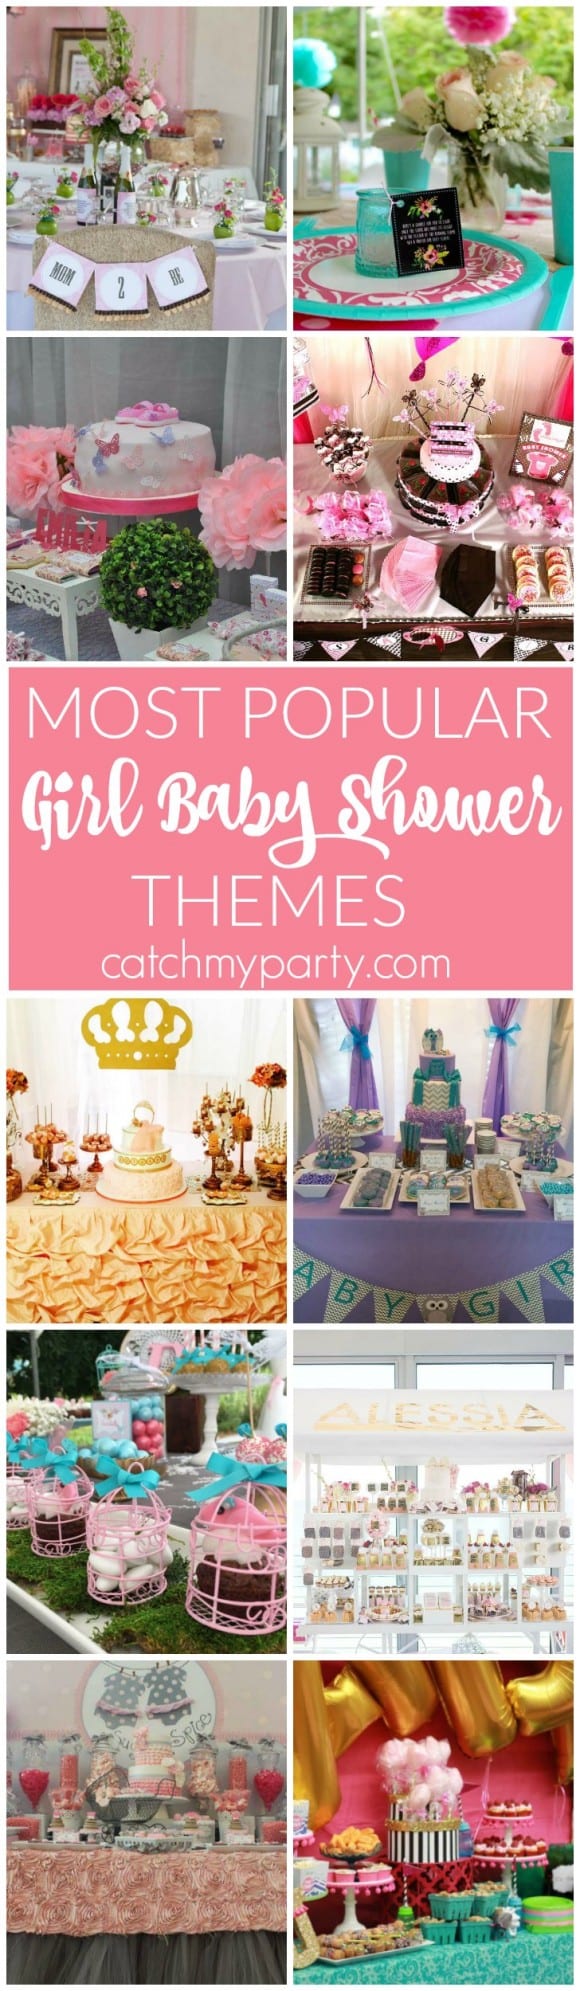 Most Popular Girl Baby Shower Themes | Catchmyparty.com